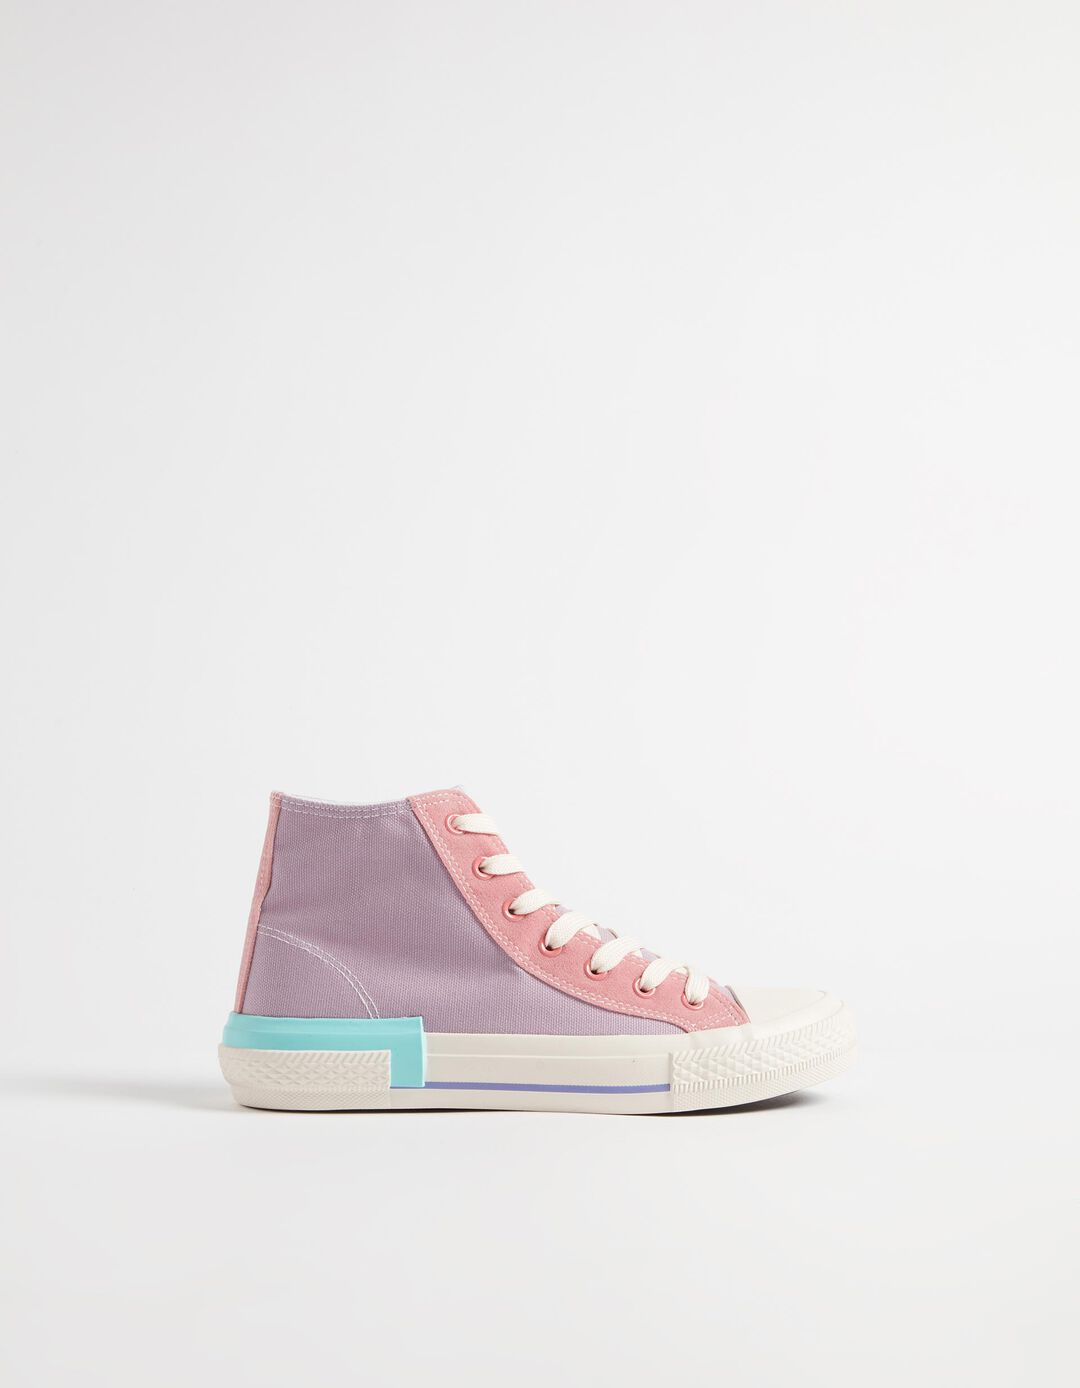 High-Top Trainers, Women, Multicolor